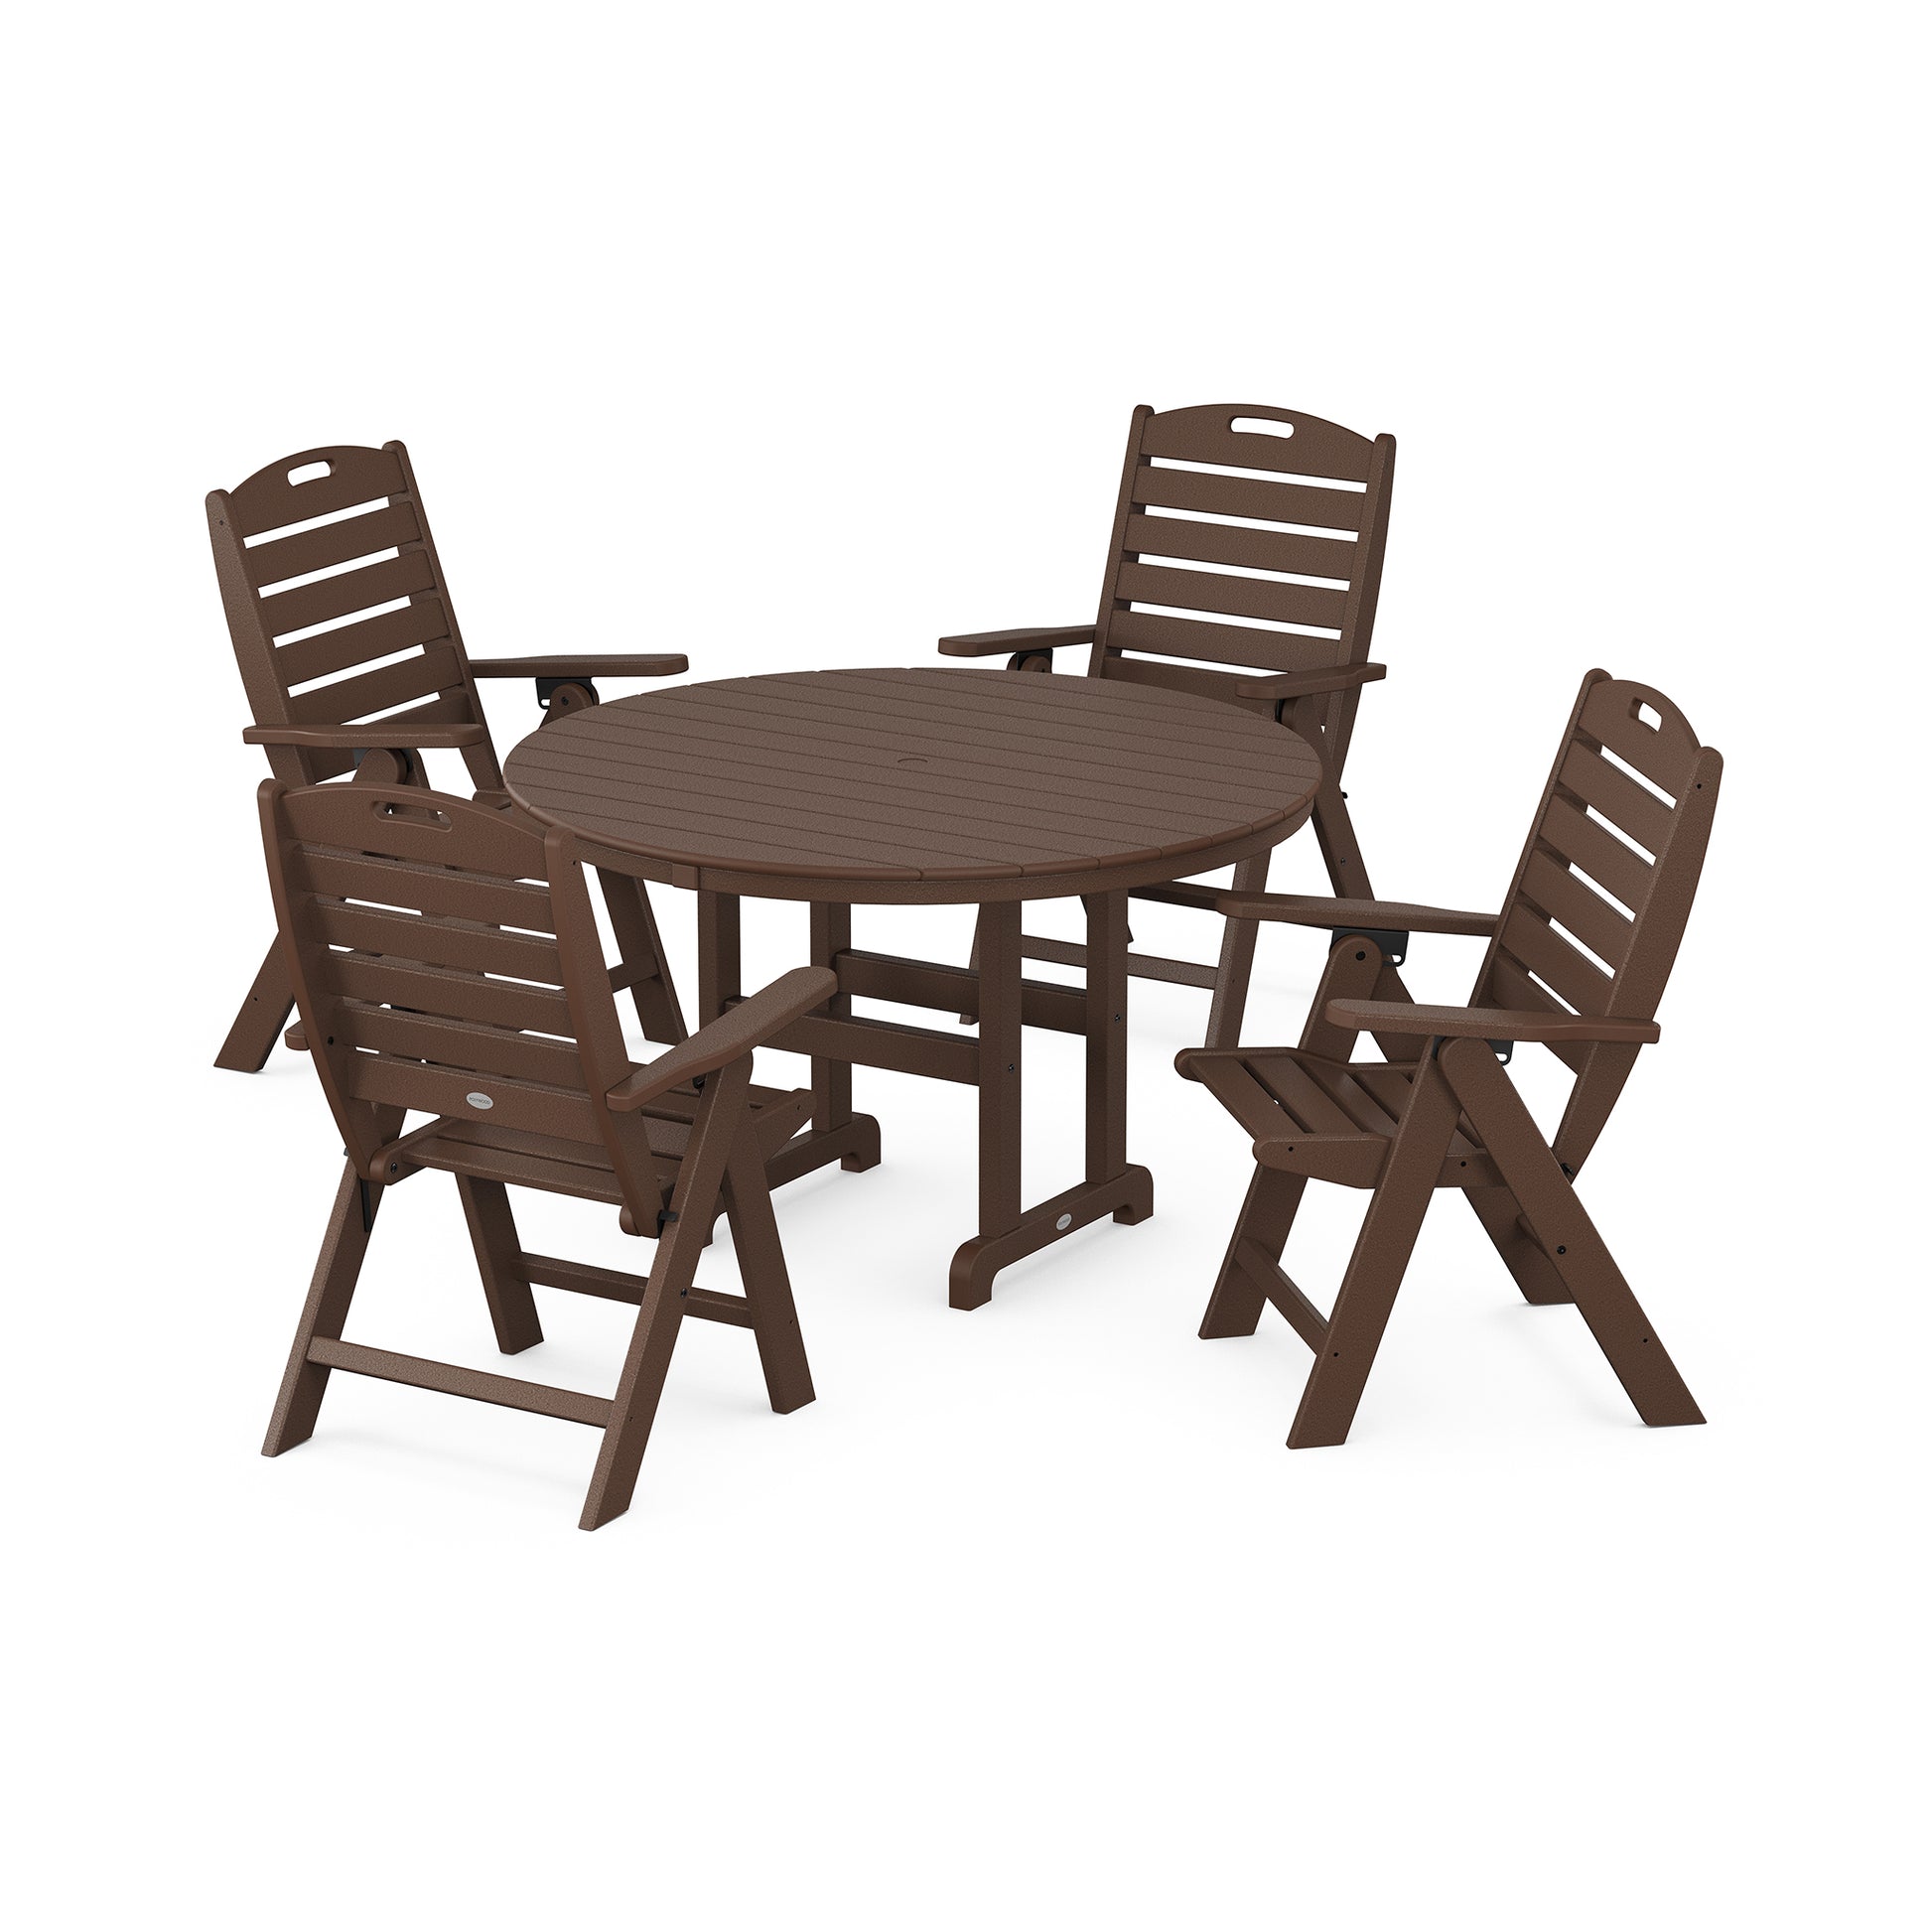 A POLYWOOD® Nautical 5-Piece Dining Set with one round table and four folding chairs, all made of plastic, showcased on a plain white background.